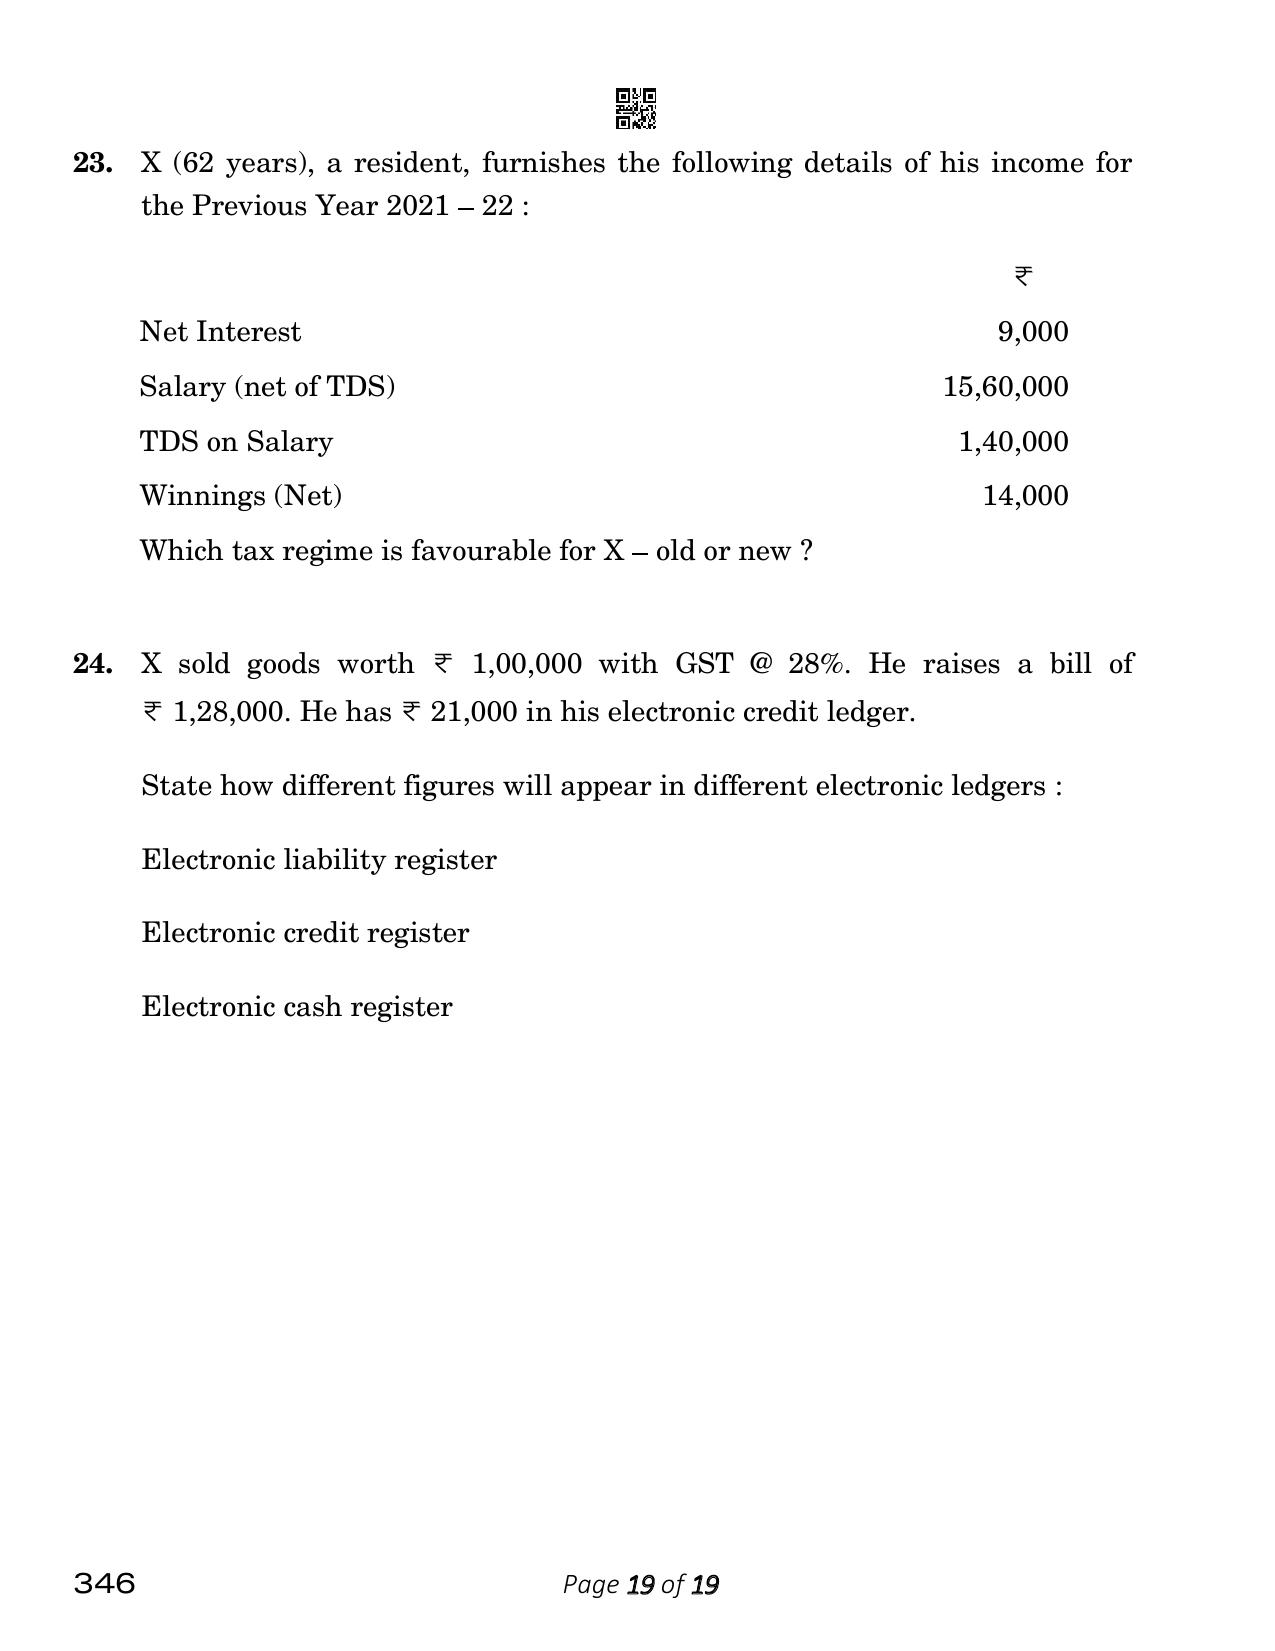 CBSE Class 12 Taxation (Compartment) 2023 Question Paper - Page 19